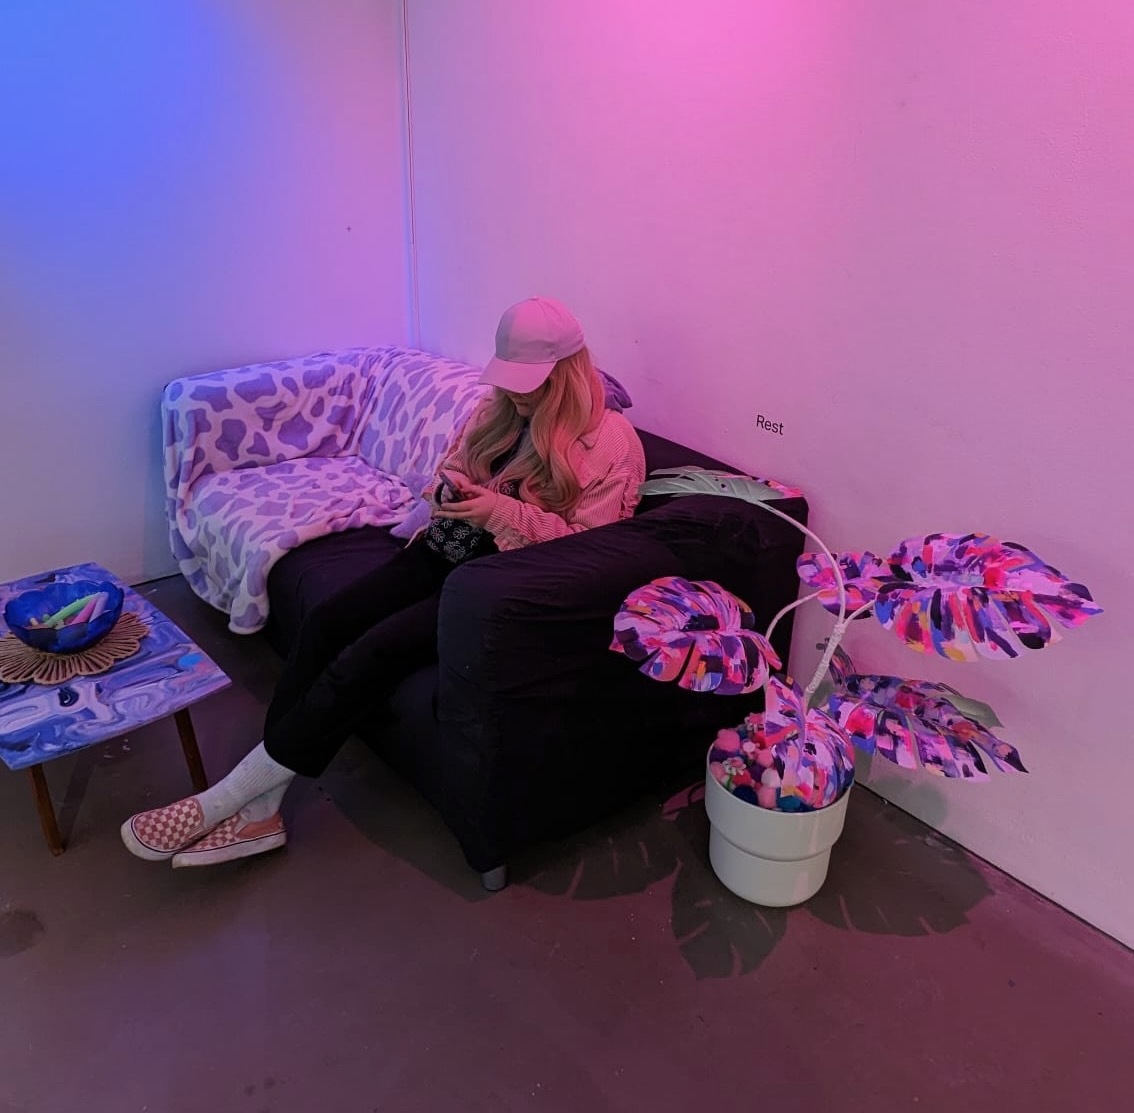 A person with long hair wearing a cap, sitting on a sofa is a softly purple-lit room, next to a colourful pot plant and low table